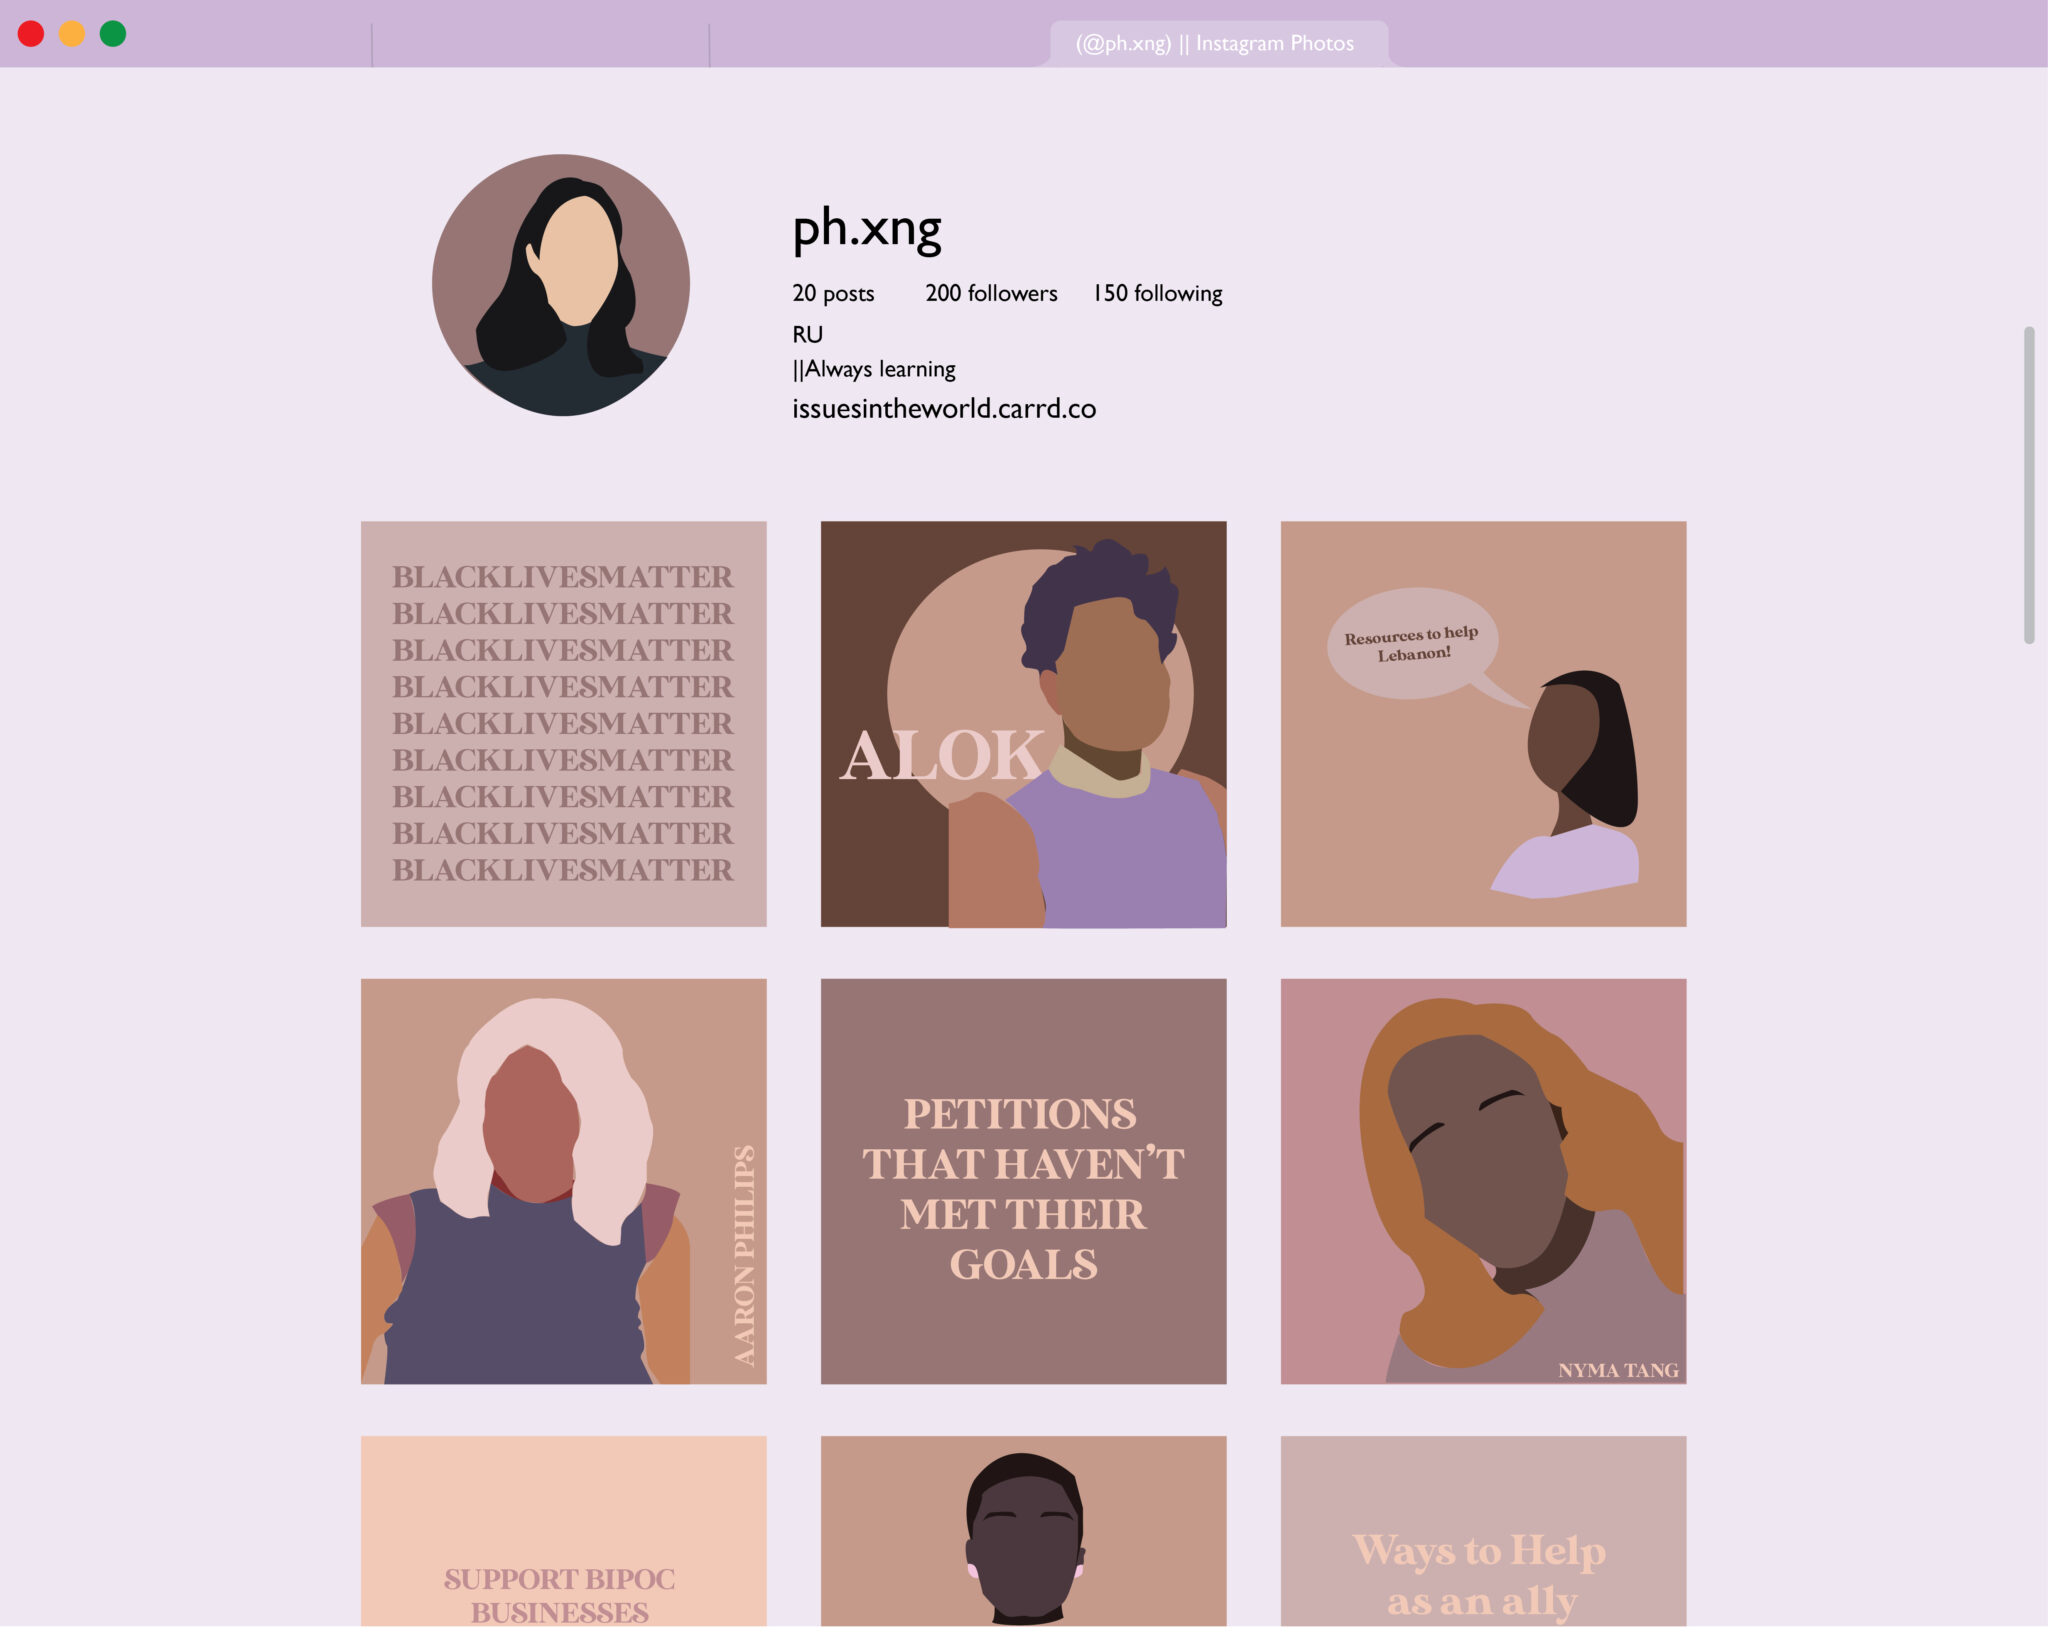 Illustration of an Instagram feed that represents diversity through posts of various identities and advocacy initiatives.